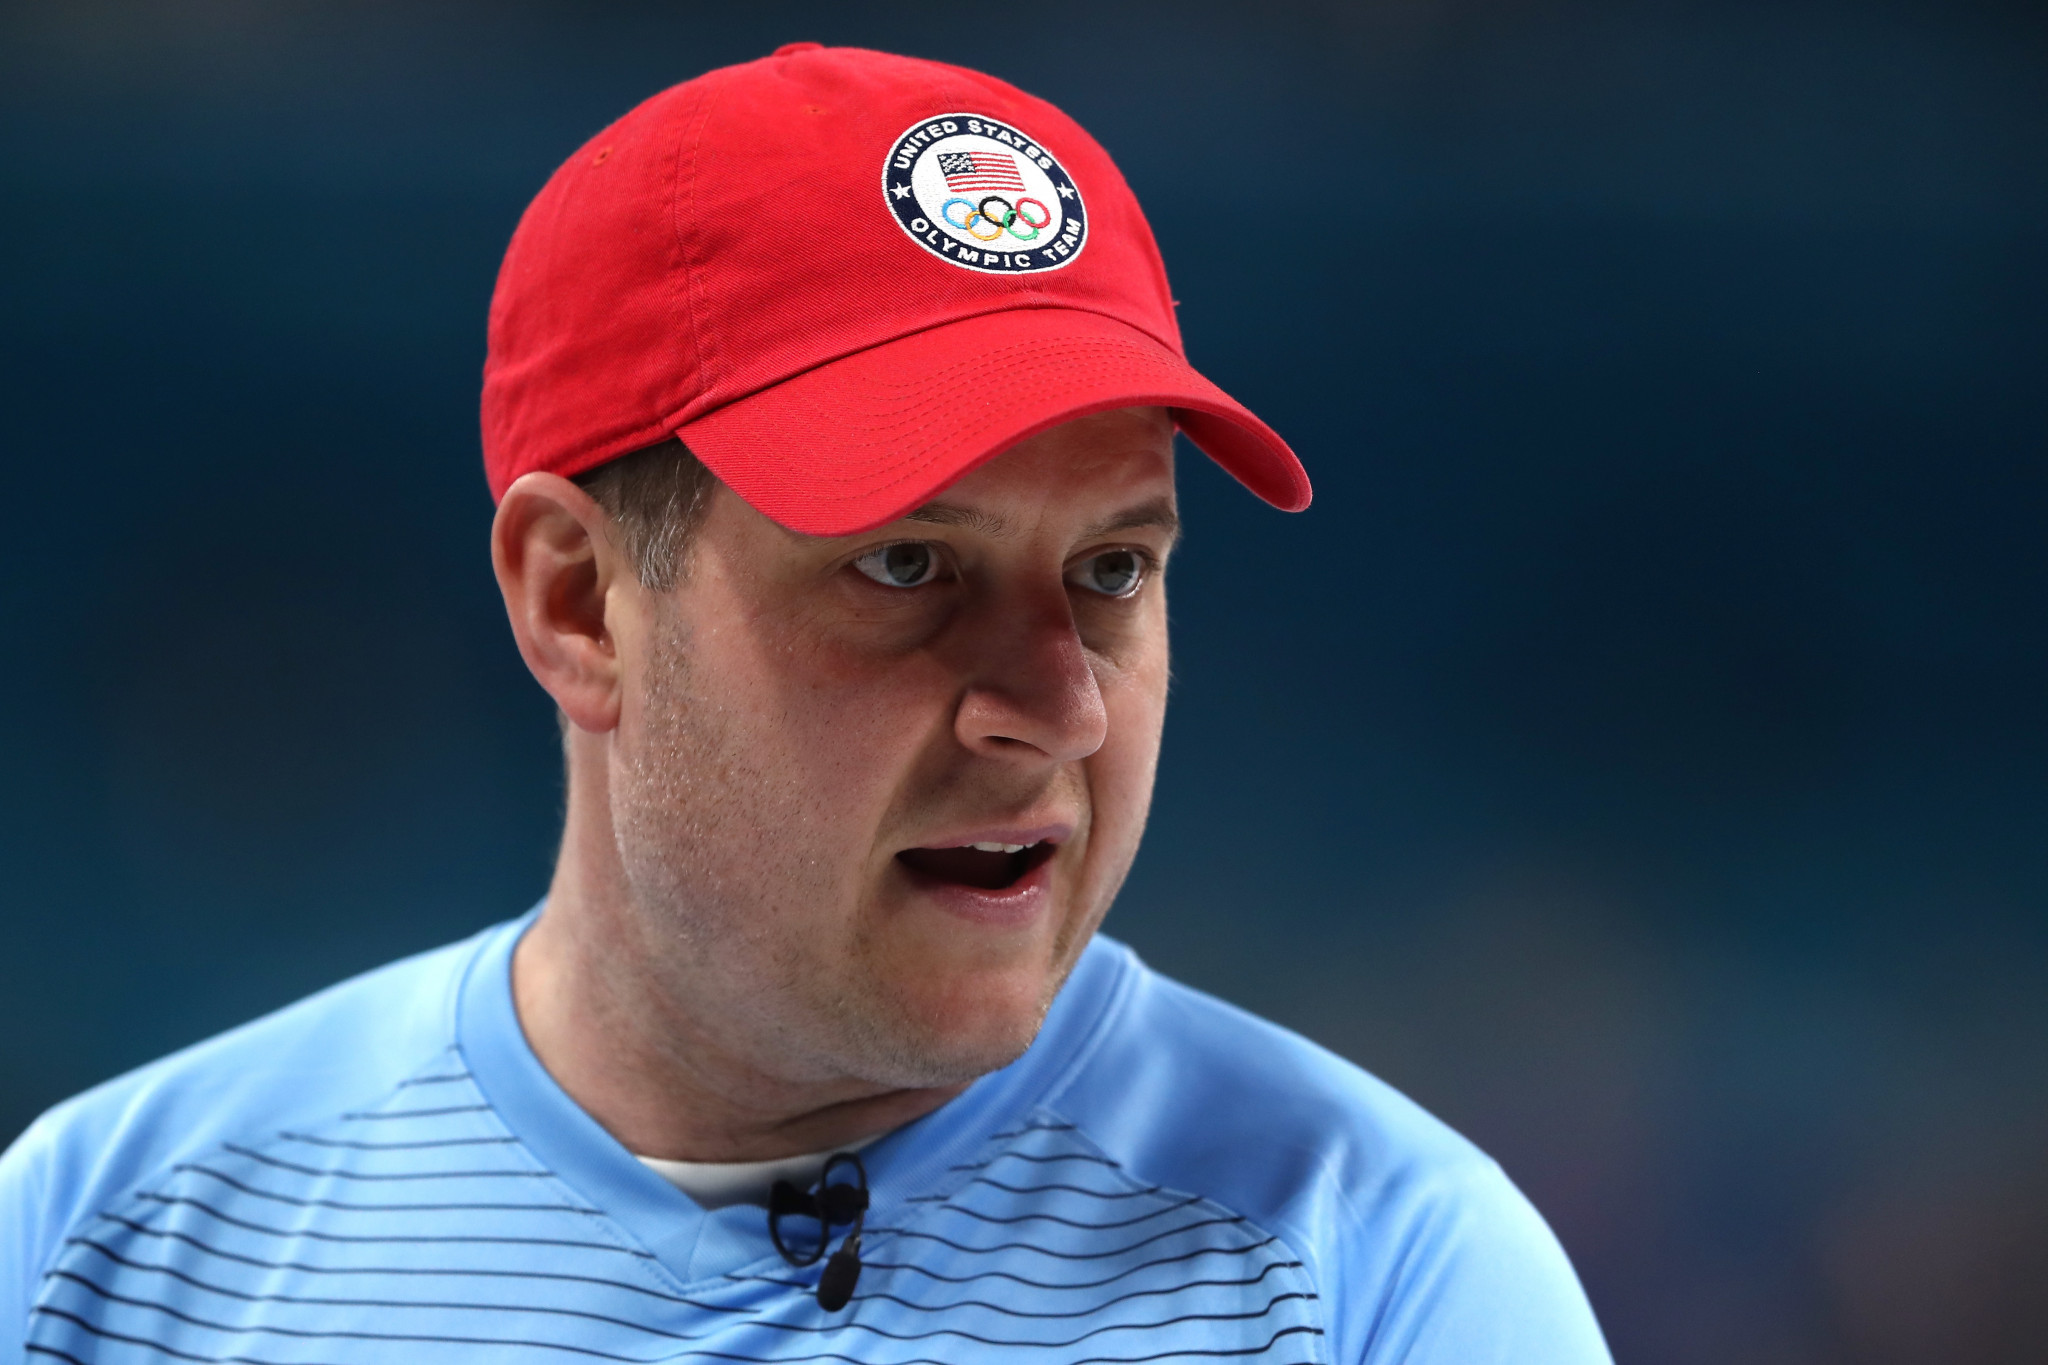 John Shuster will feature in the North American team for the competition ©Getty Images